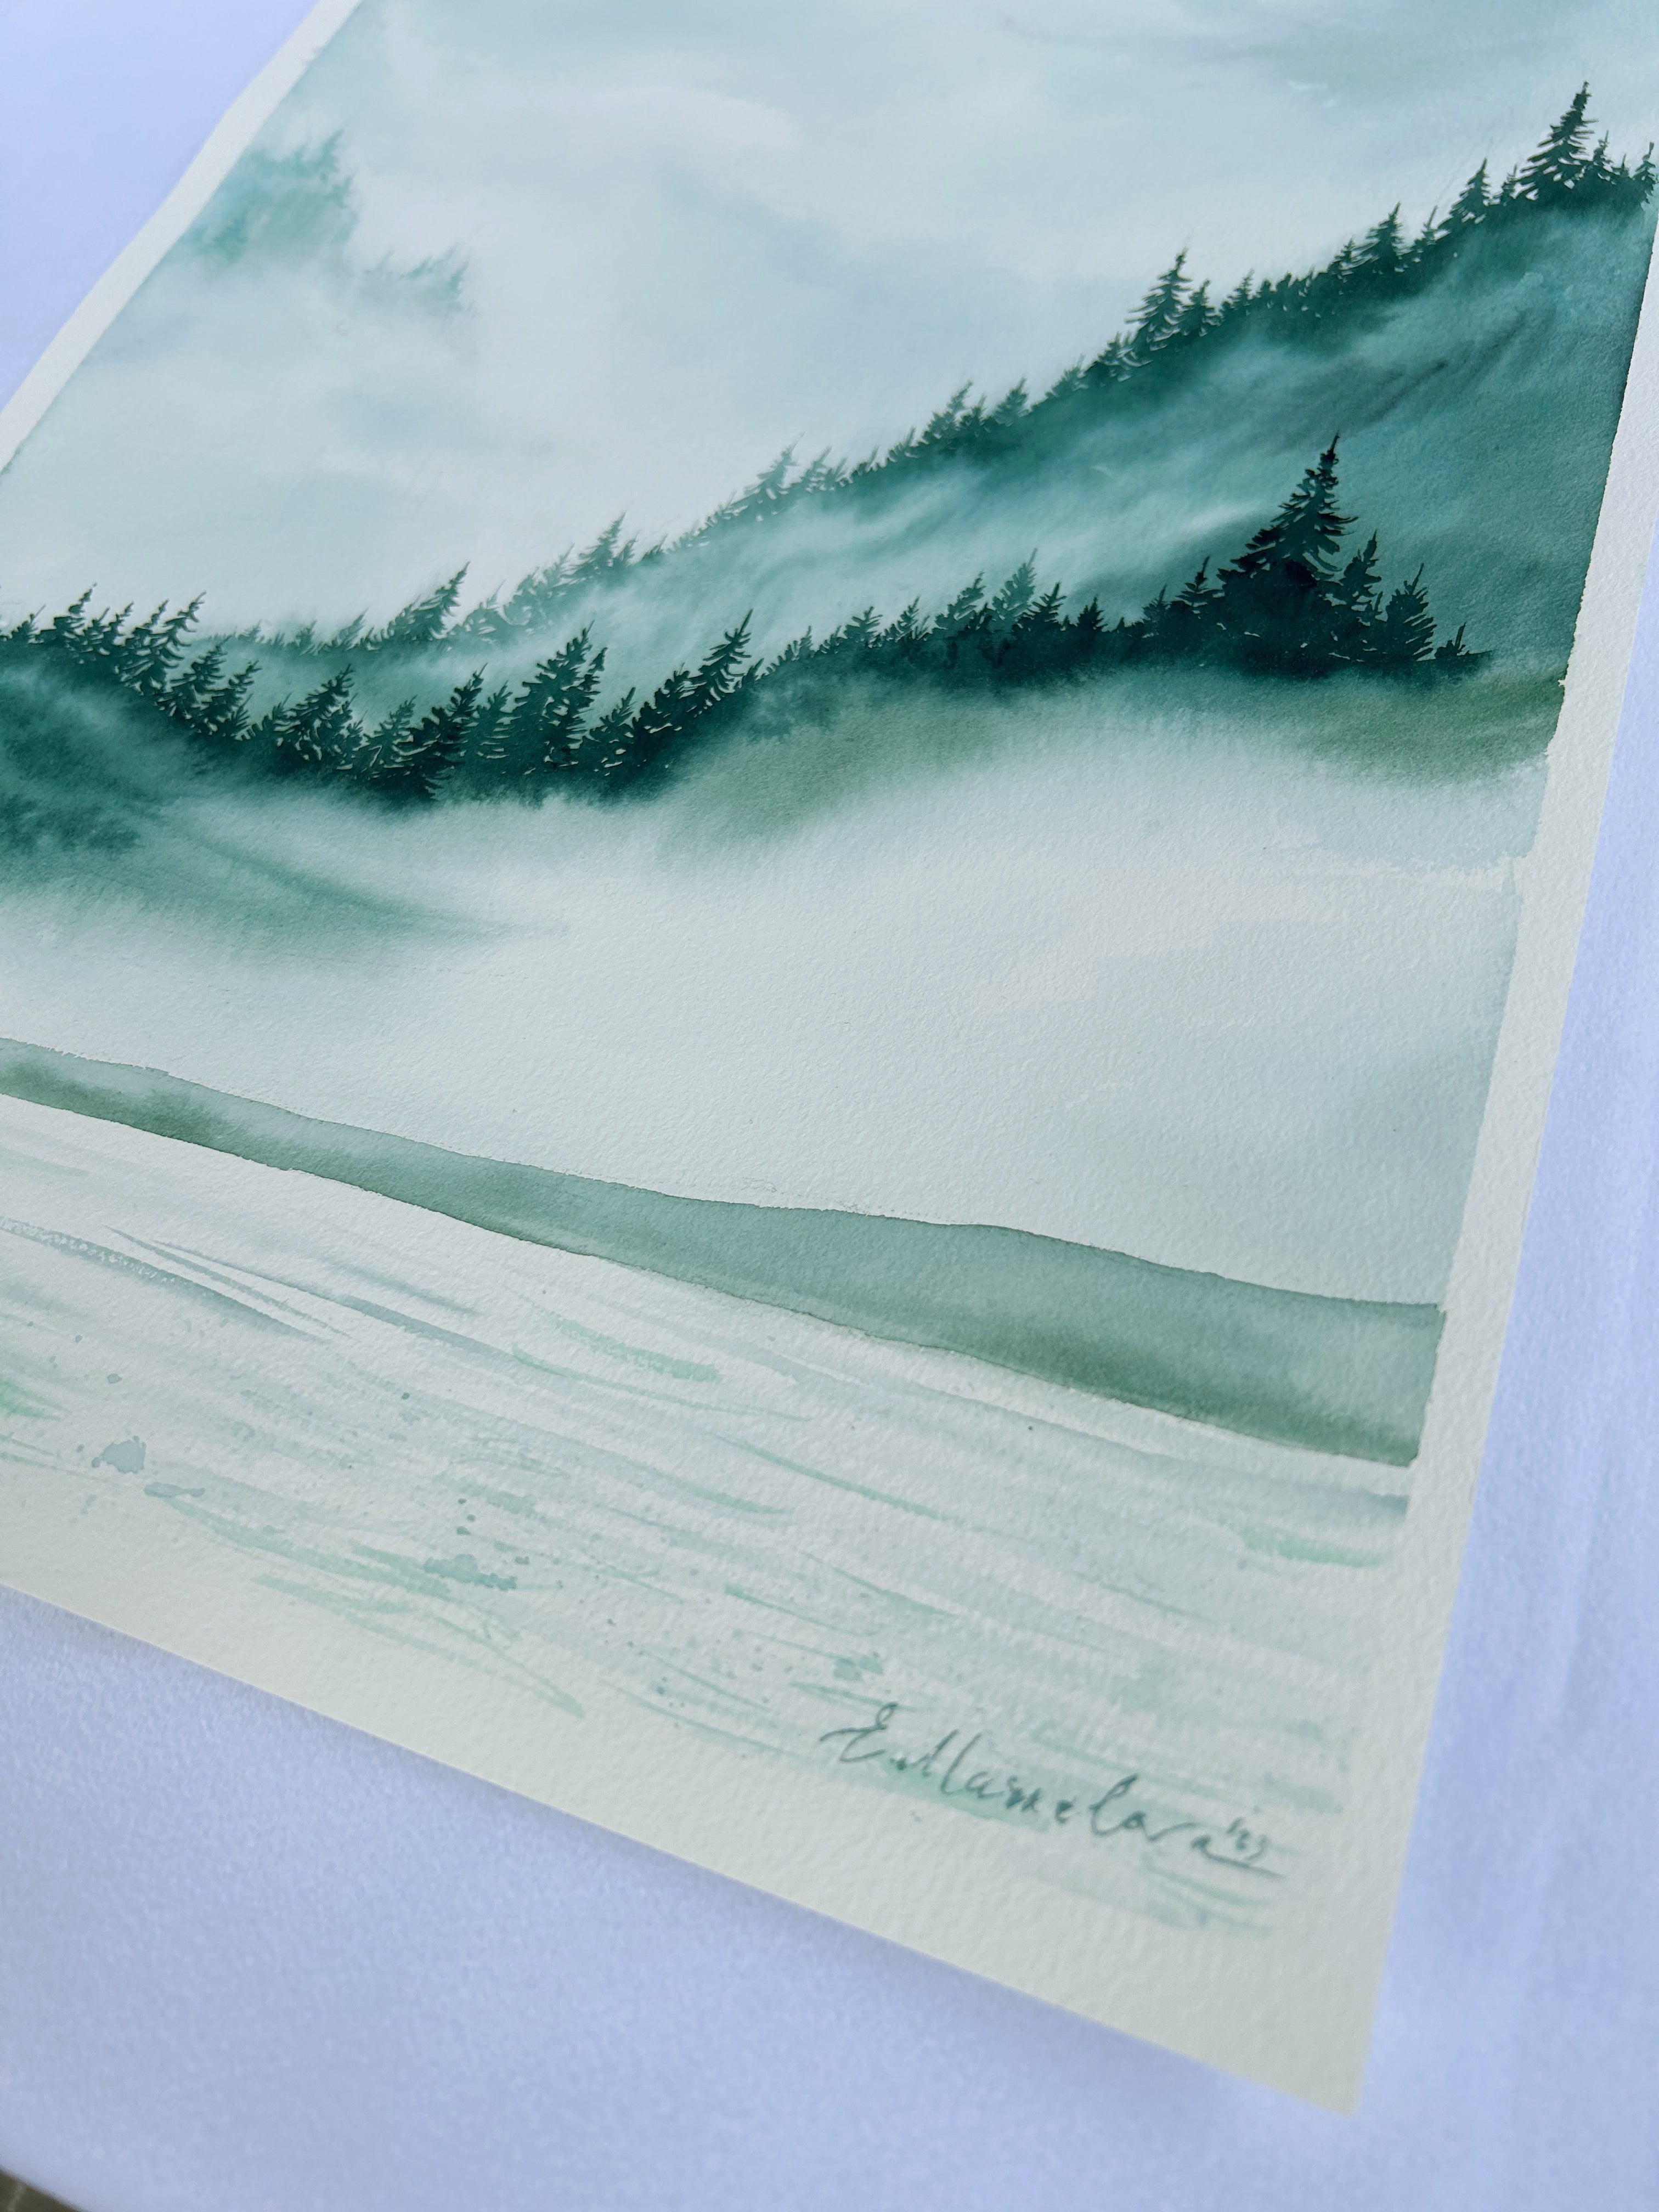 Sailing into the Unknown - Original Watercolor Diptych Two Paintings